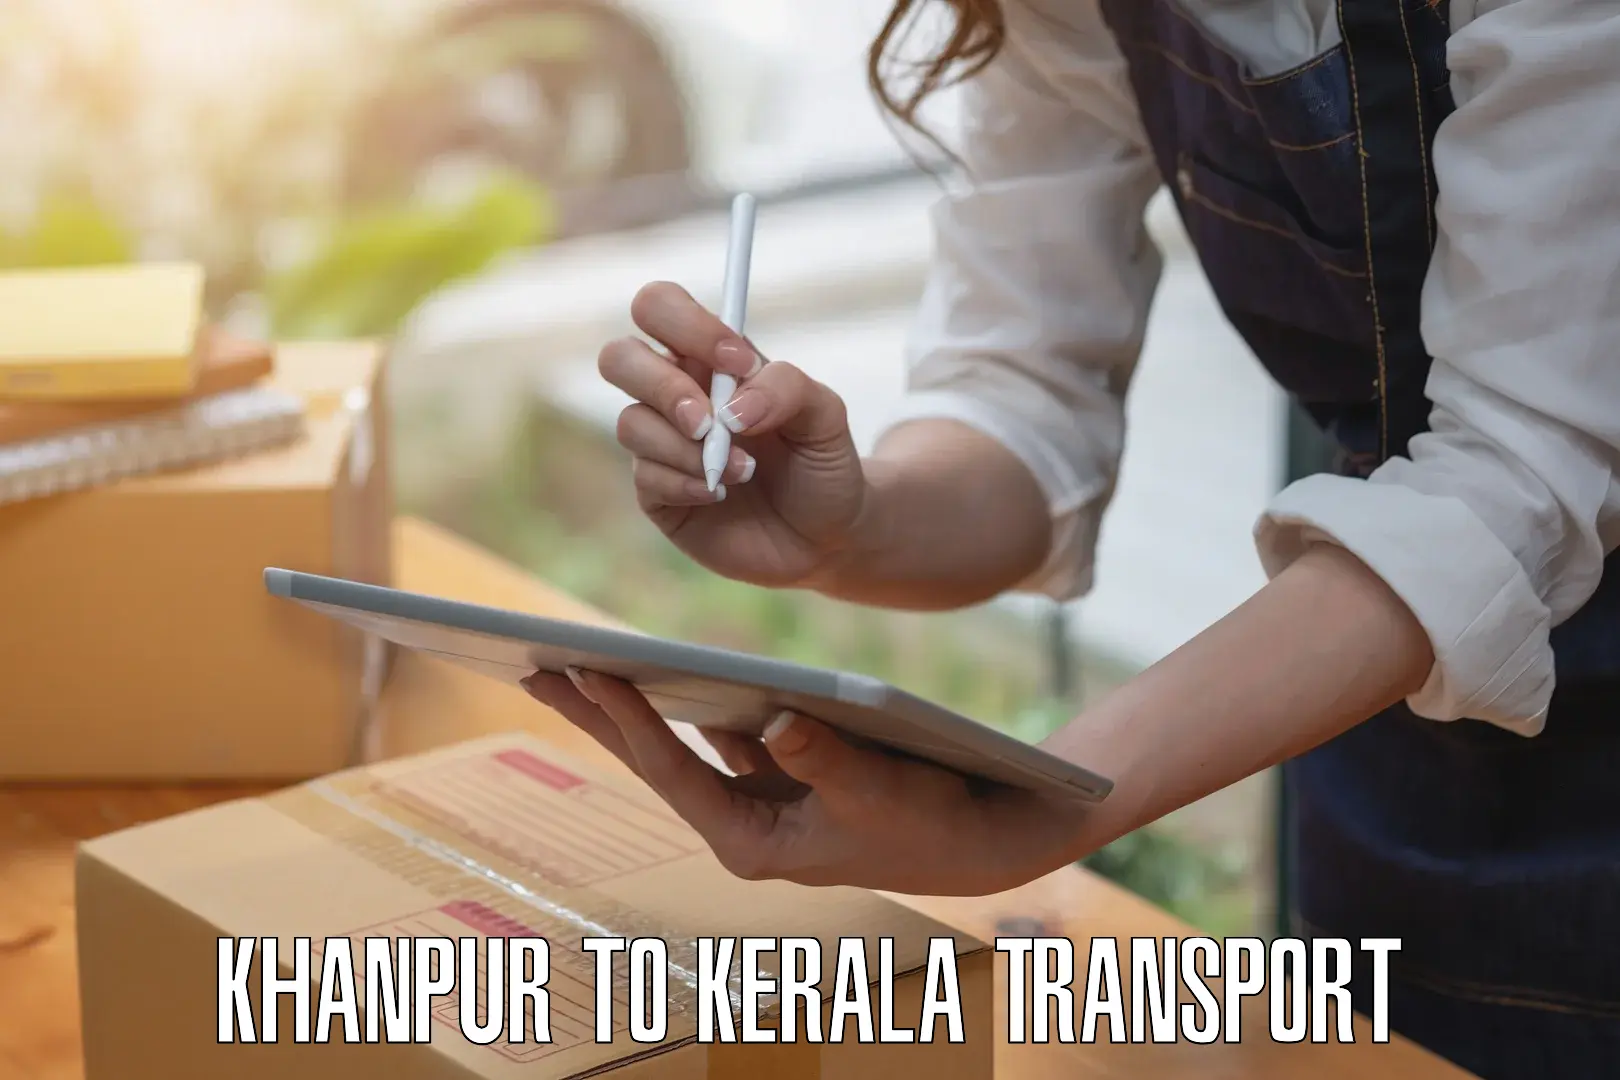 Road transport online services Khanpur to Kilimanoor